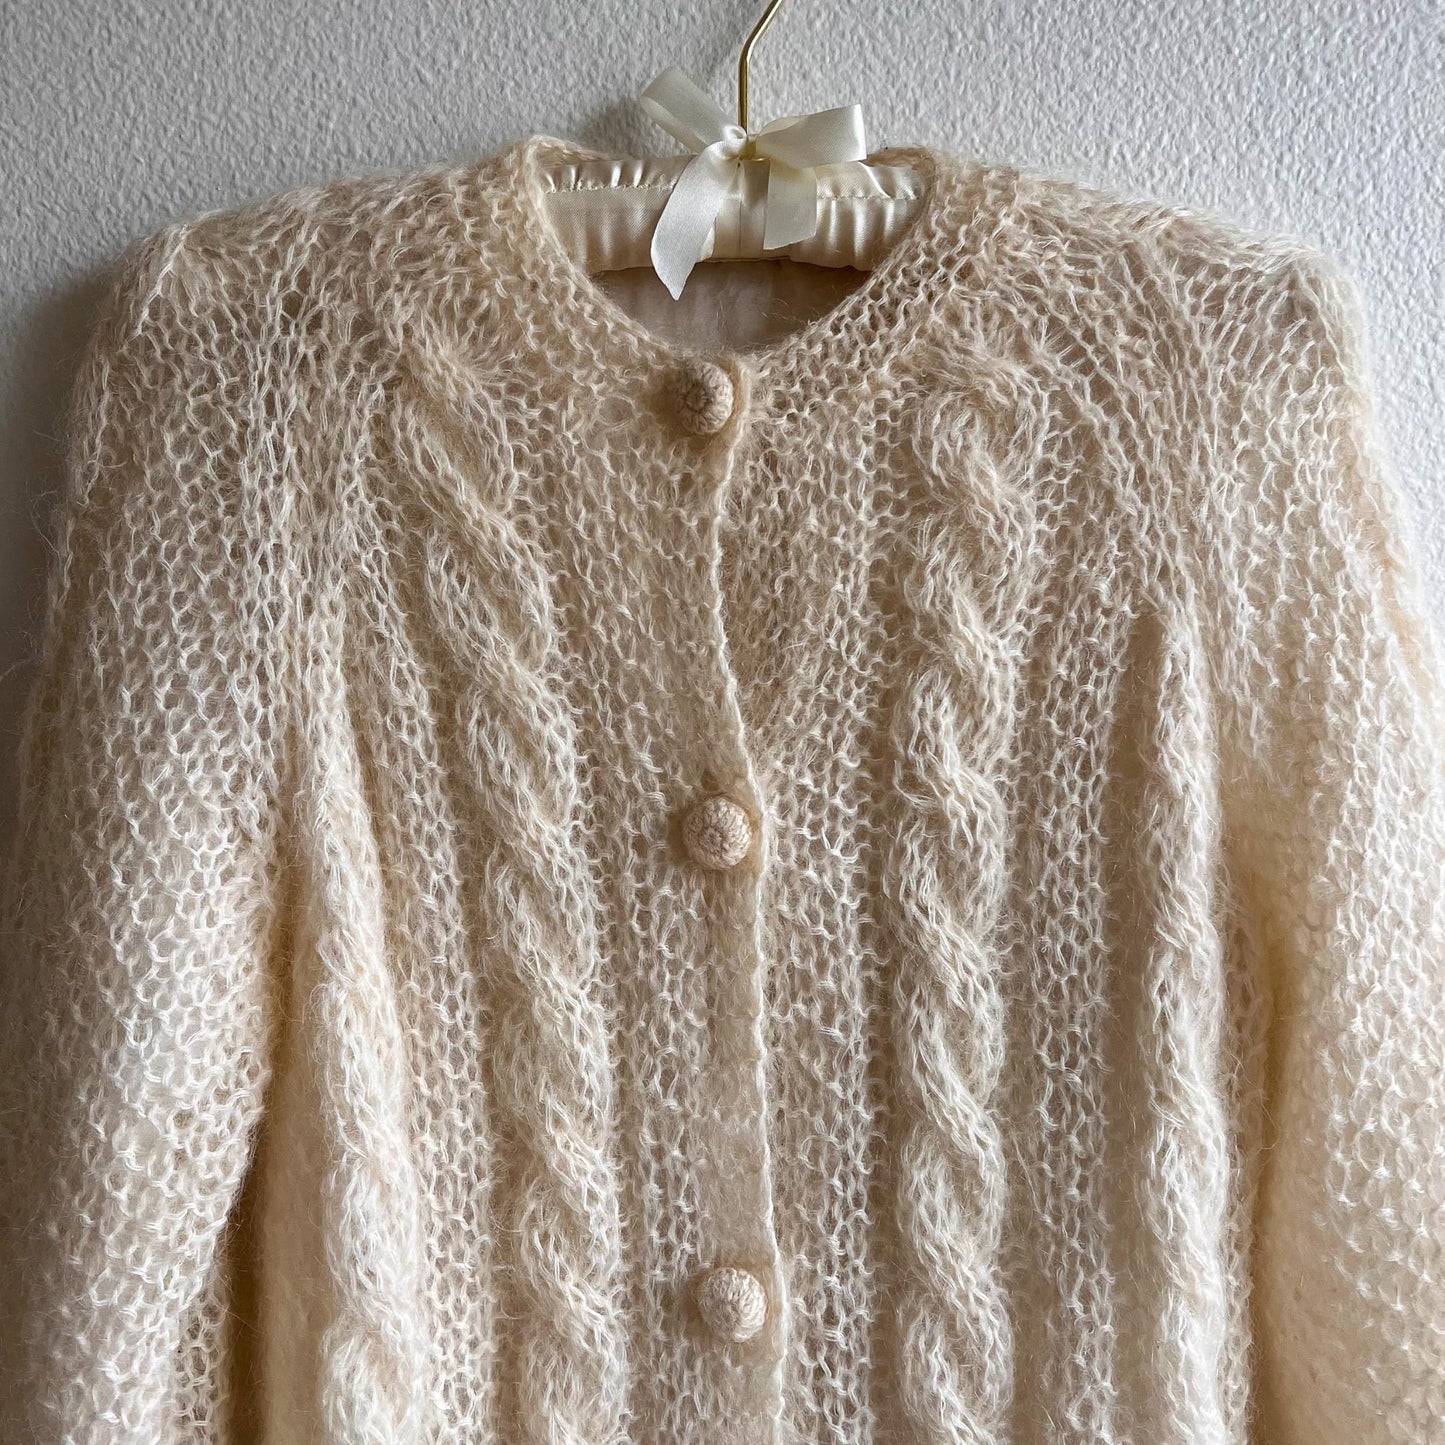 1950s Cream Cable Knit Buttoned Cardigan (S/M)